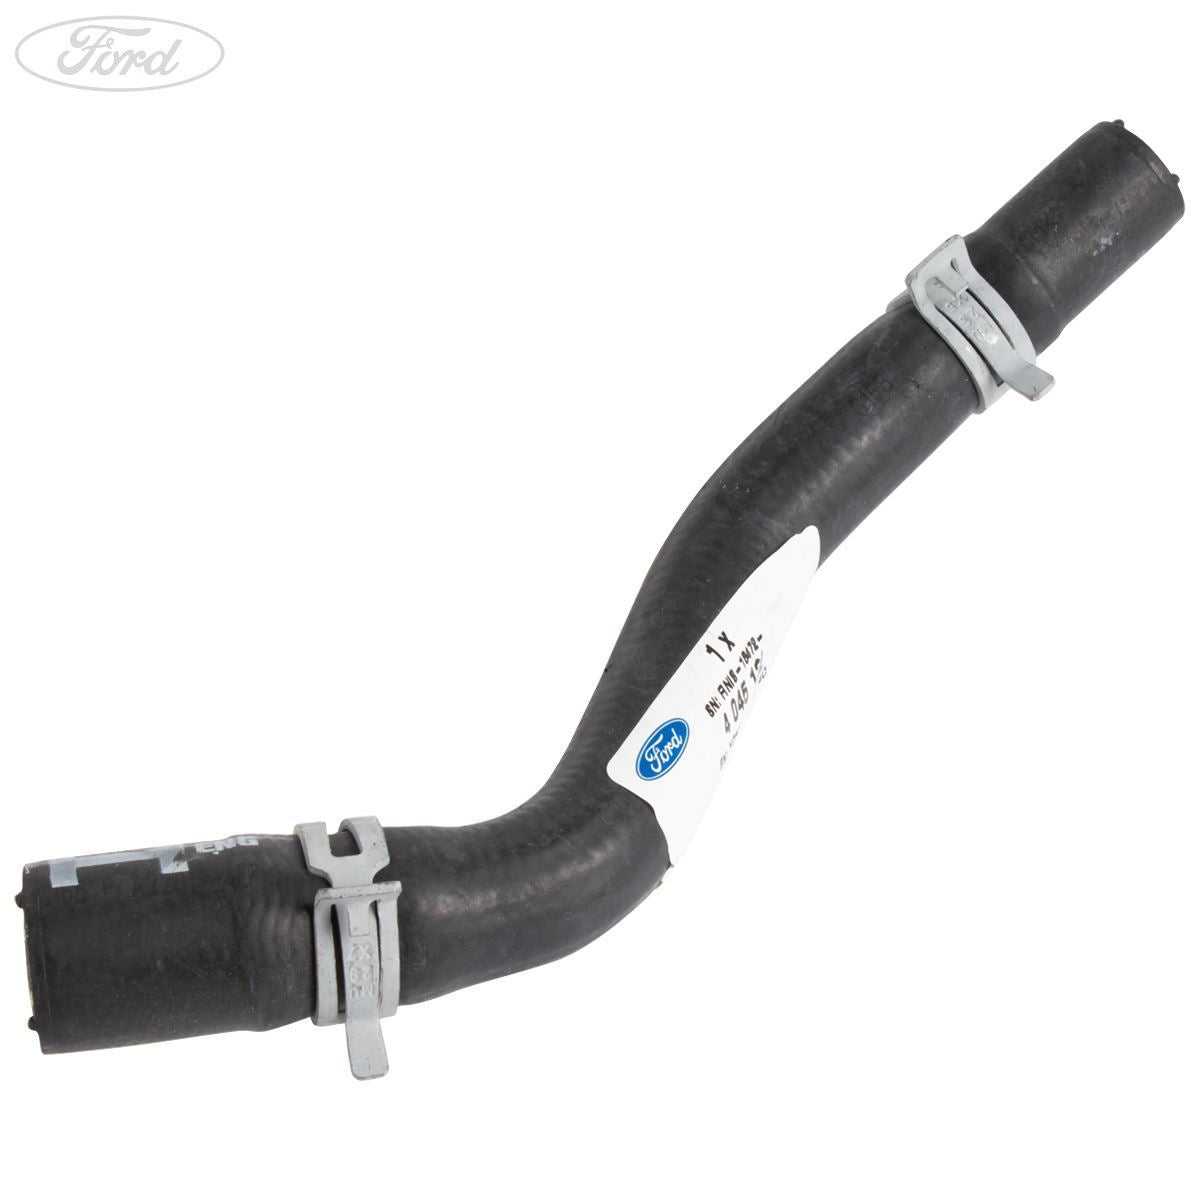 Ford, TRANSIT WATER PUMP OUTLET HOSE PIPE 2000-2006